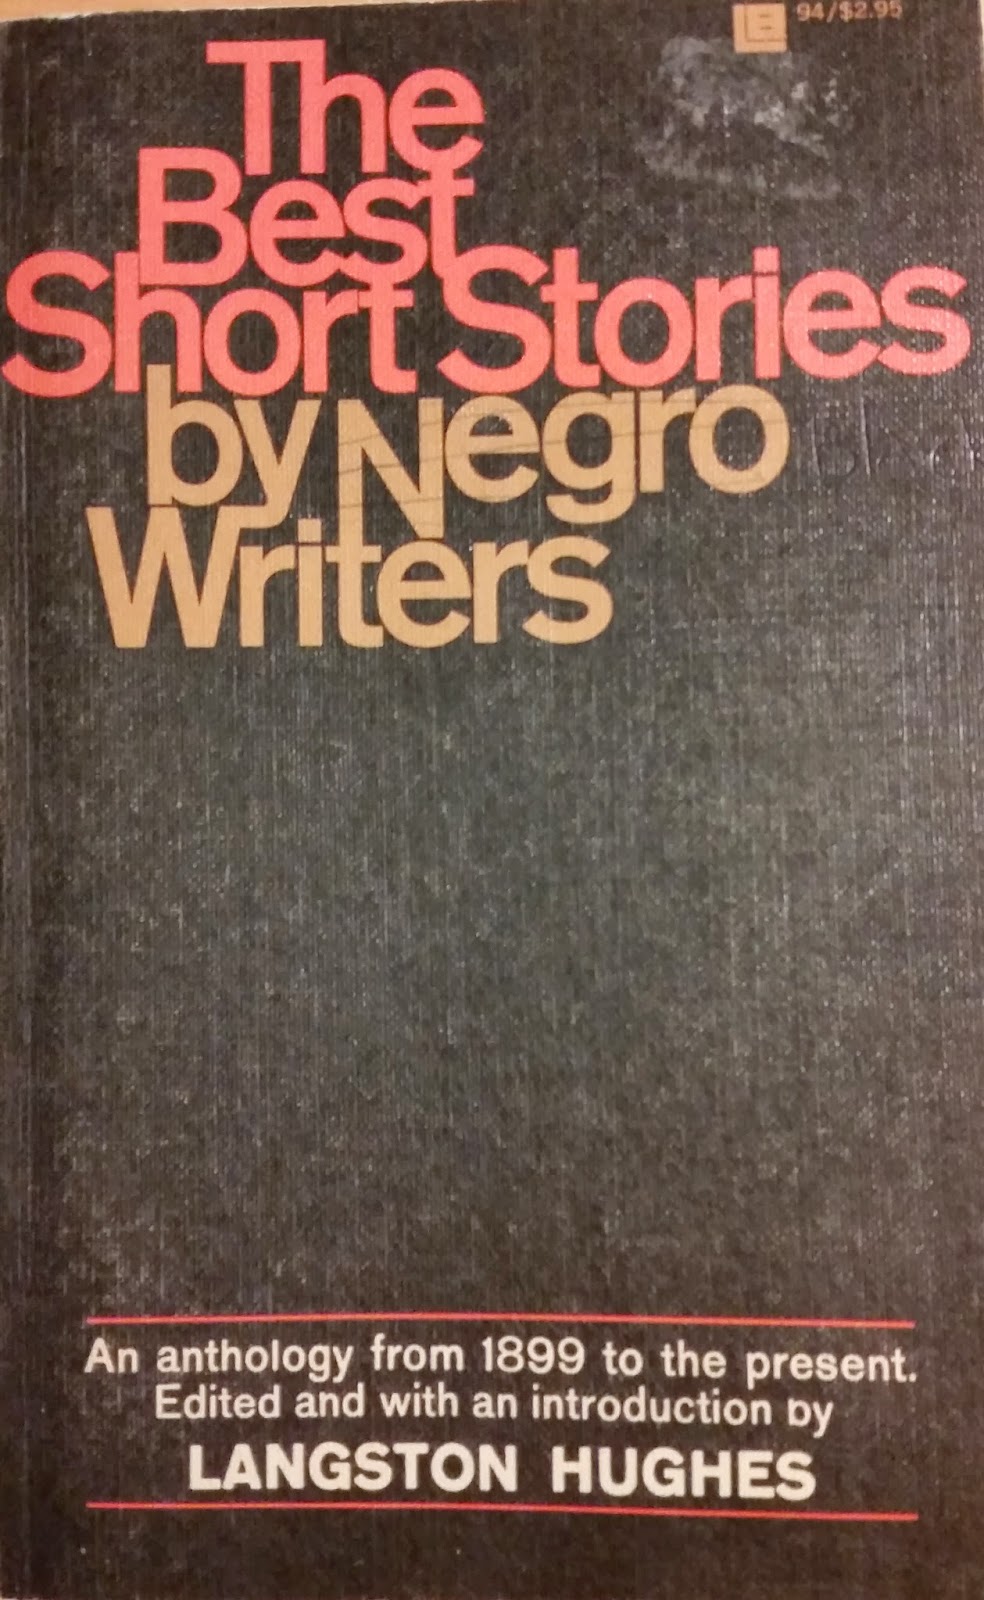 Book Cover: The Best Short Stories by Negro Writers by Langston Hughes